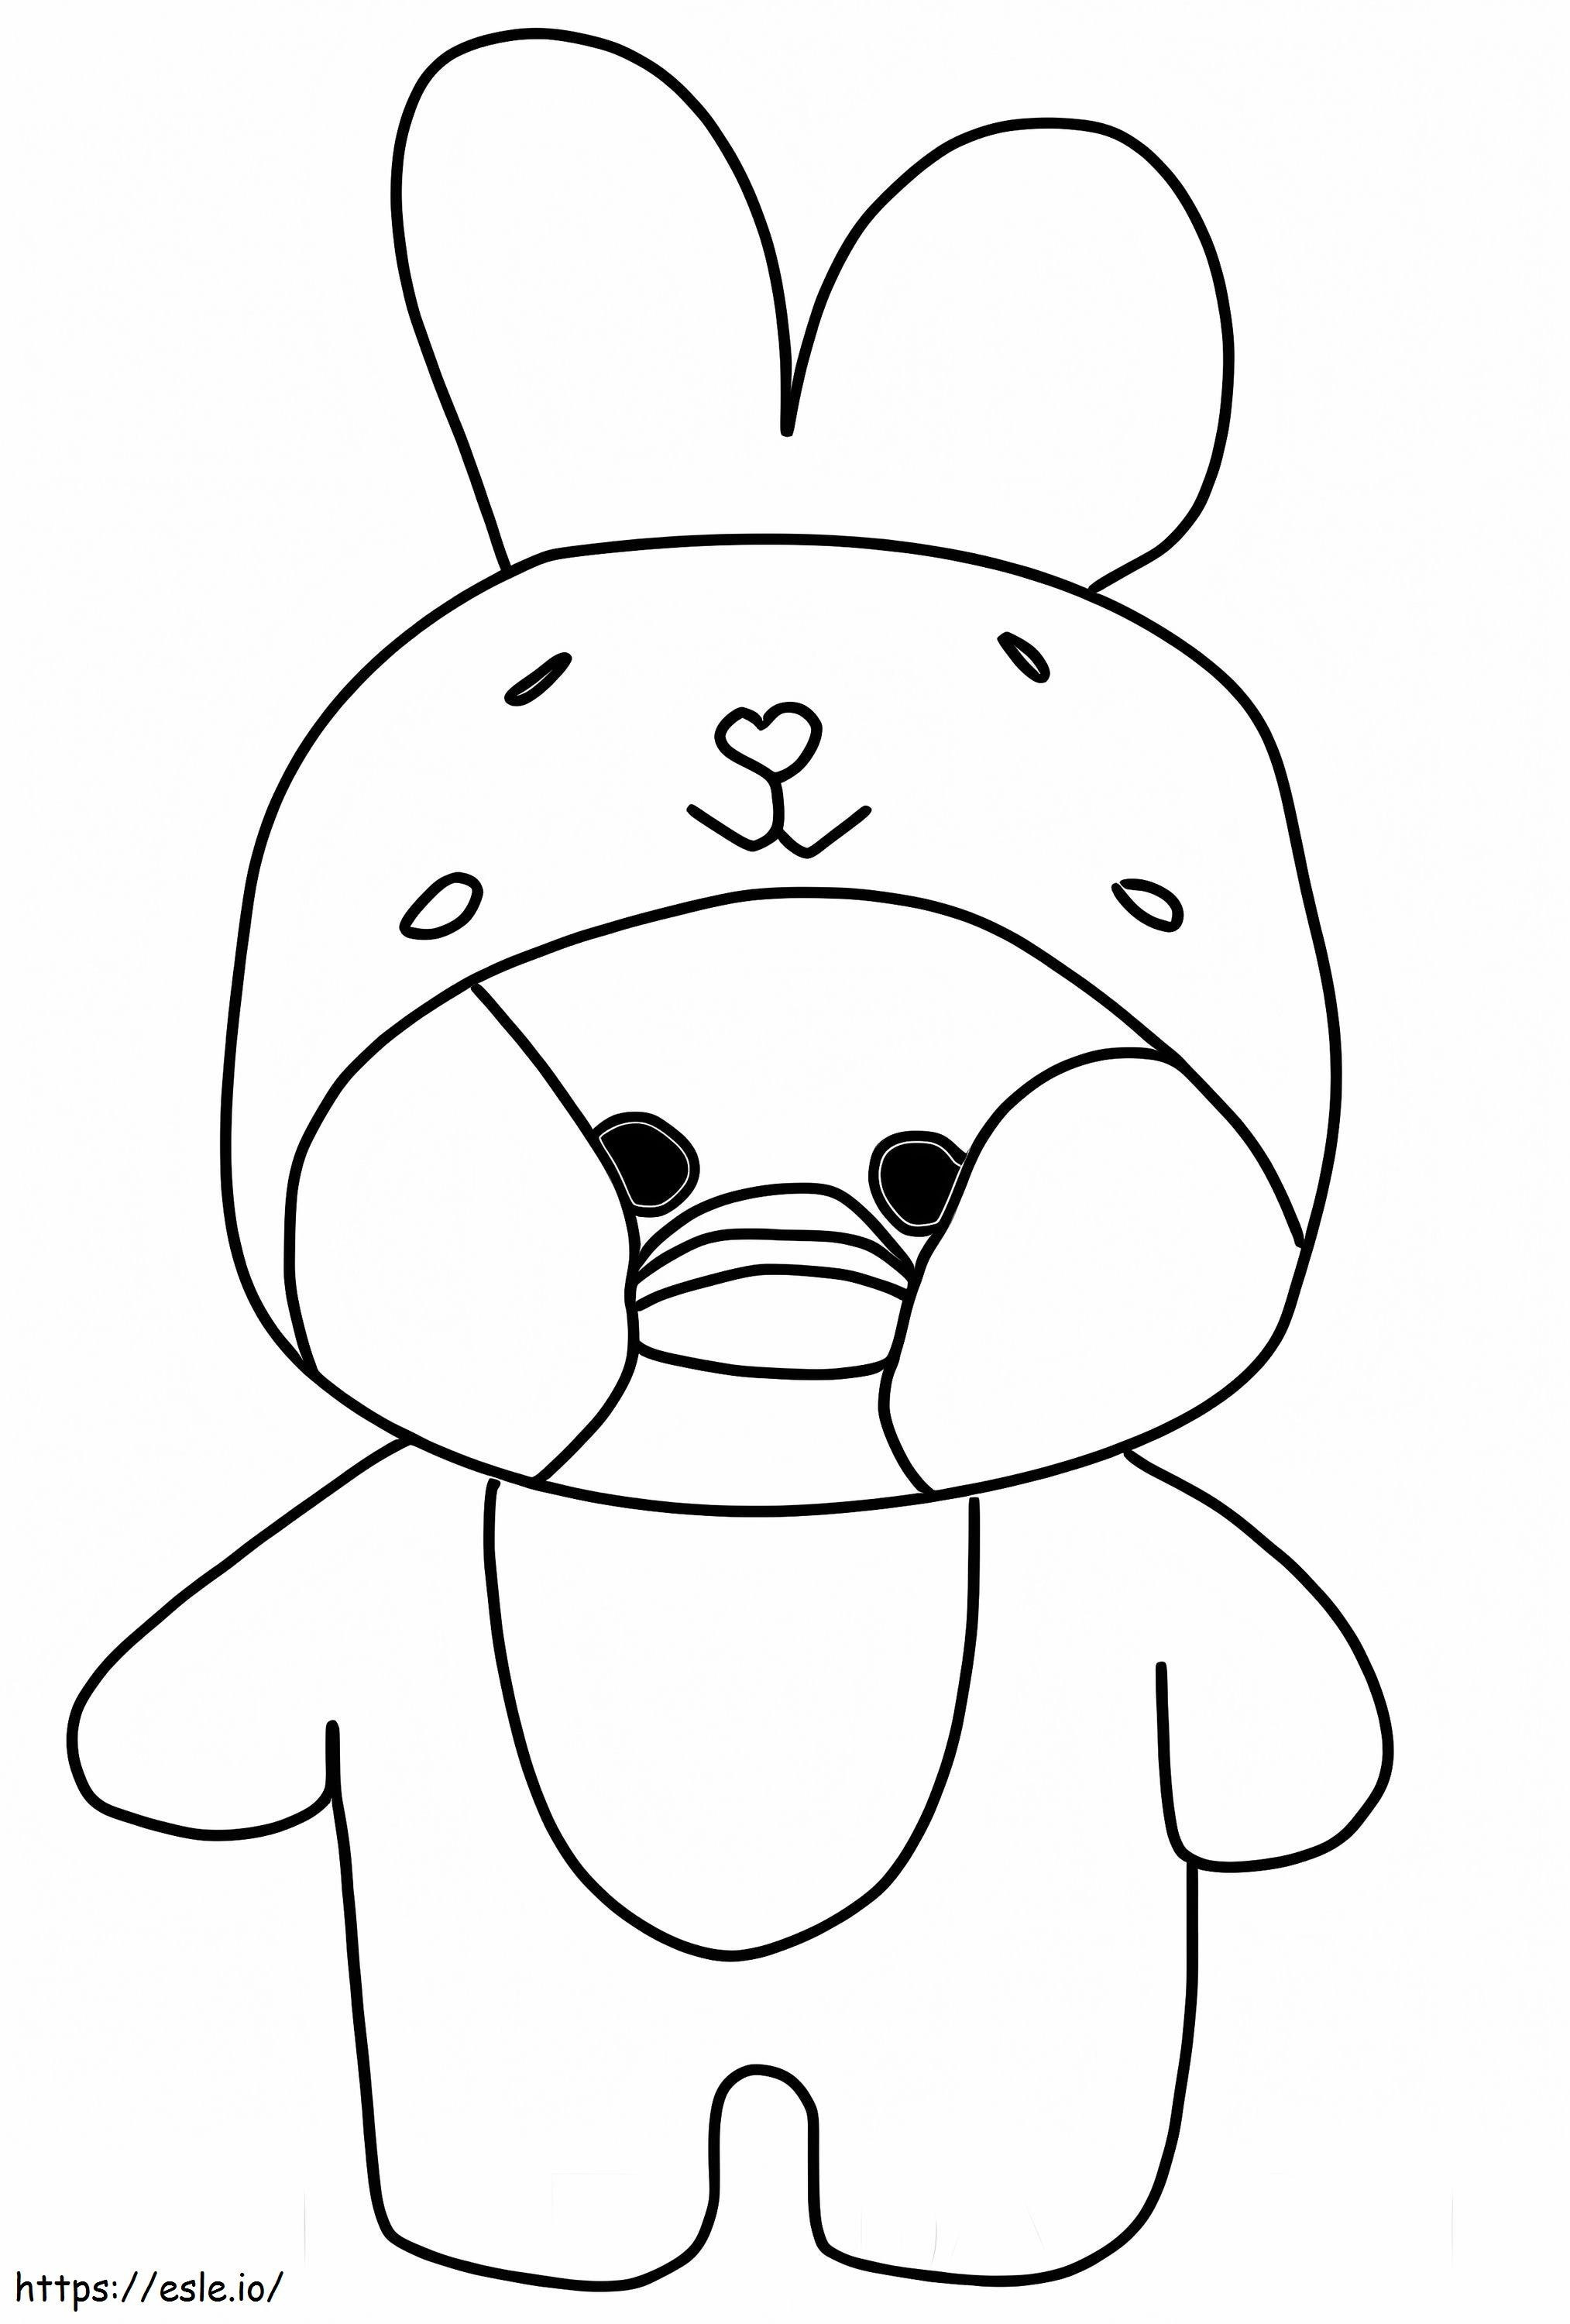 Adorable Lalafanfan Duck coloring page